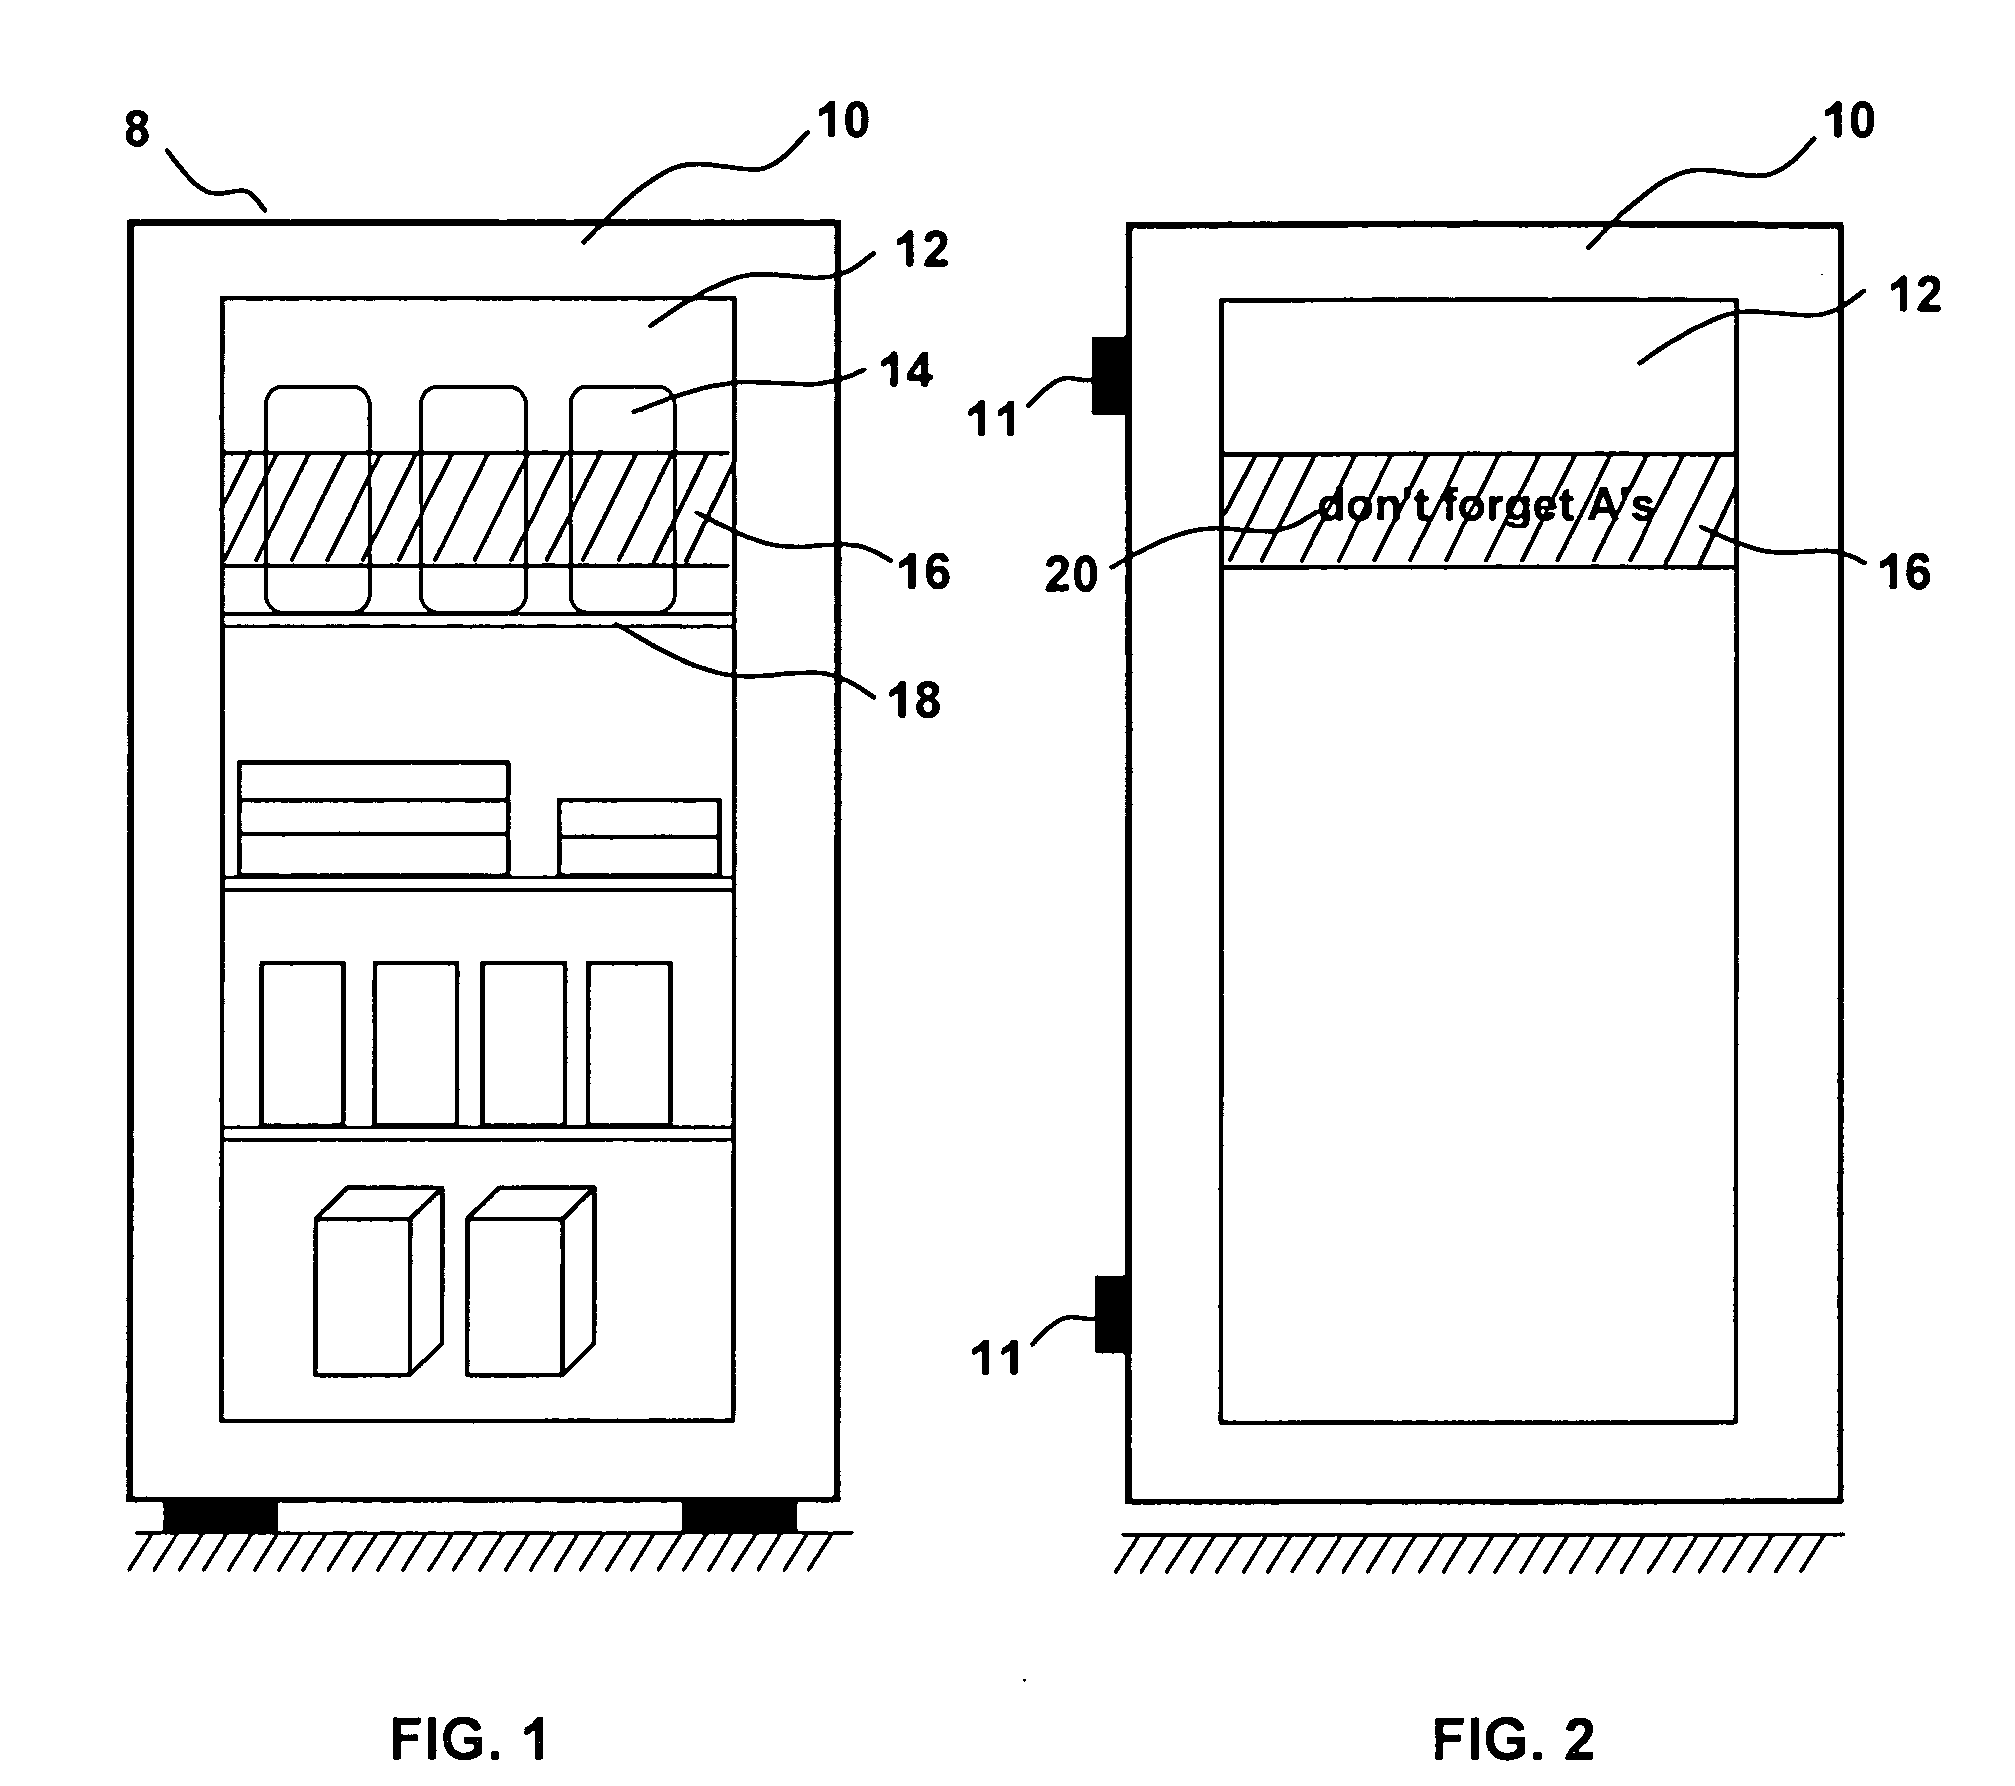 Method of providing see-through advertisements on a retail display cabinet